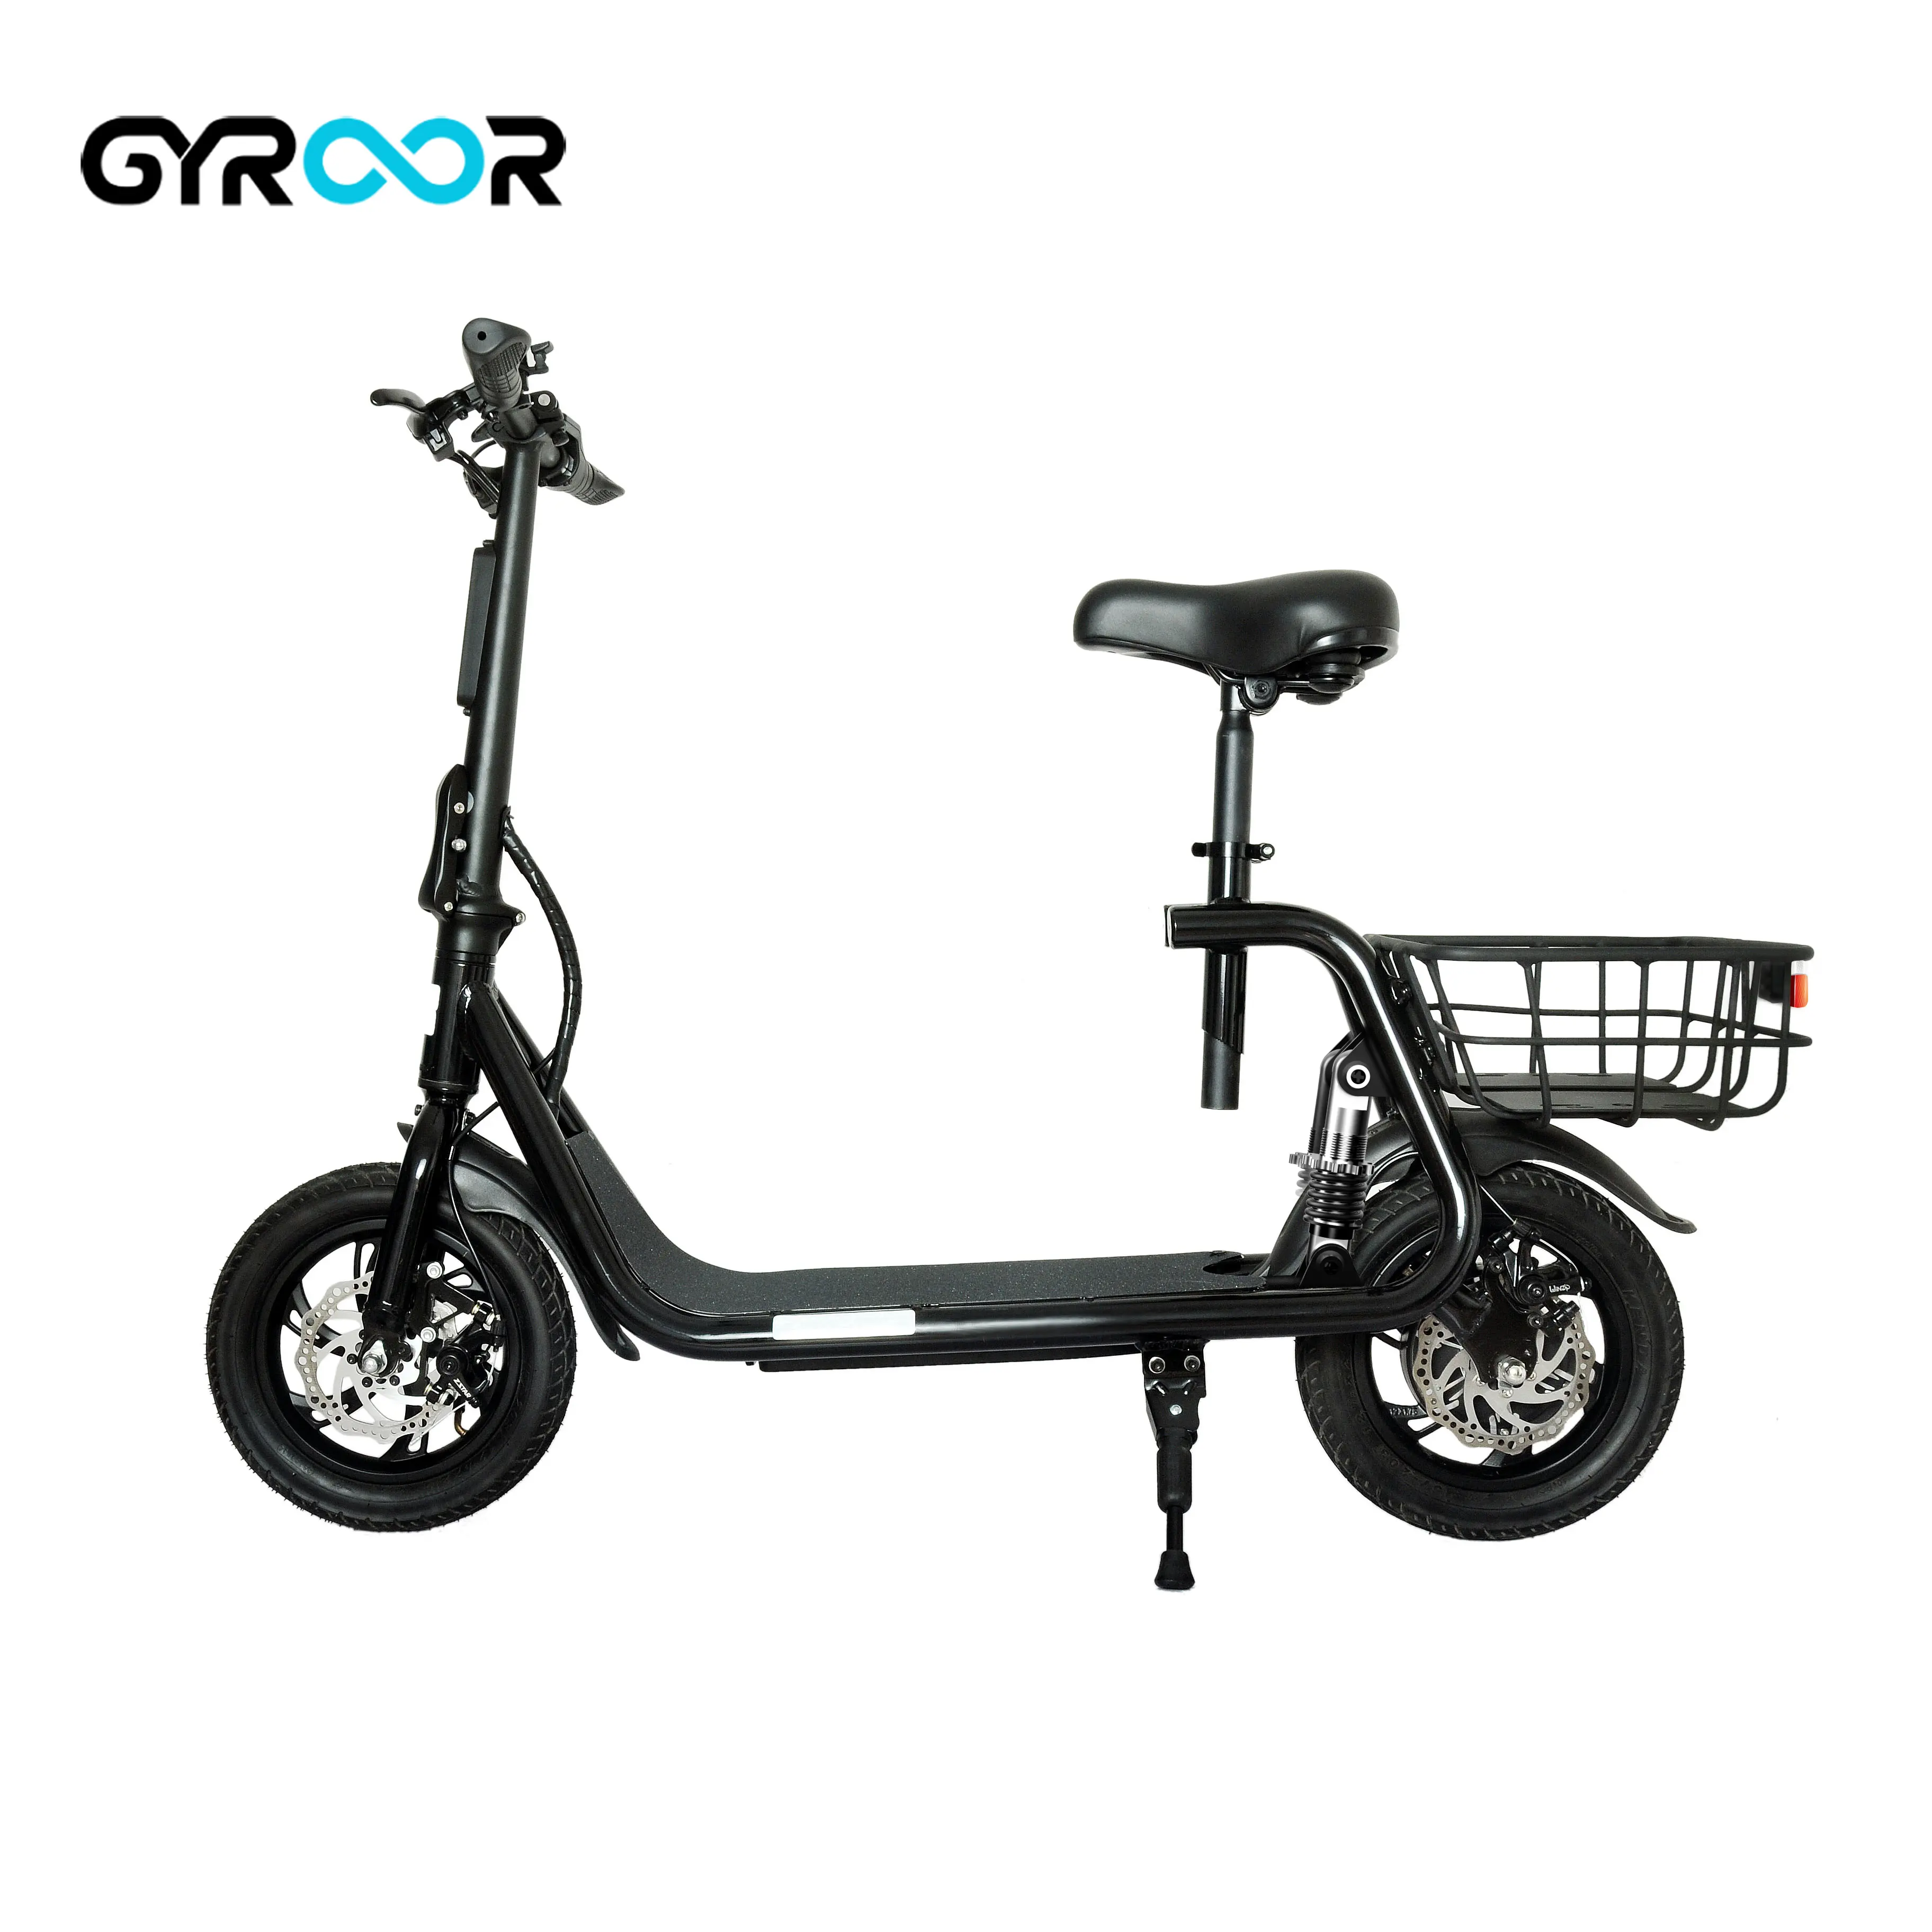 Gyroor Electric Bicycle 36V 350W 12 Inches Fat Ebike Bicycle 25km/h Mileage Electric Bike electric city bike